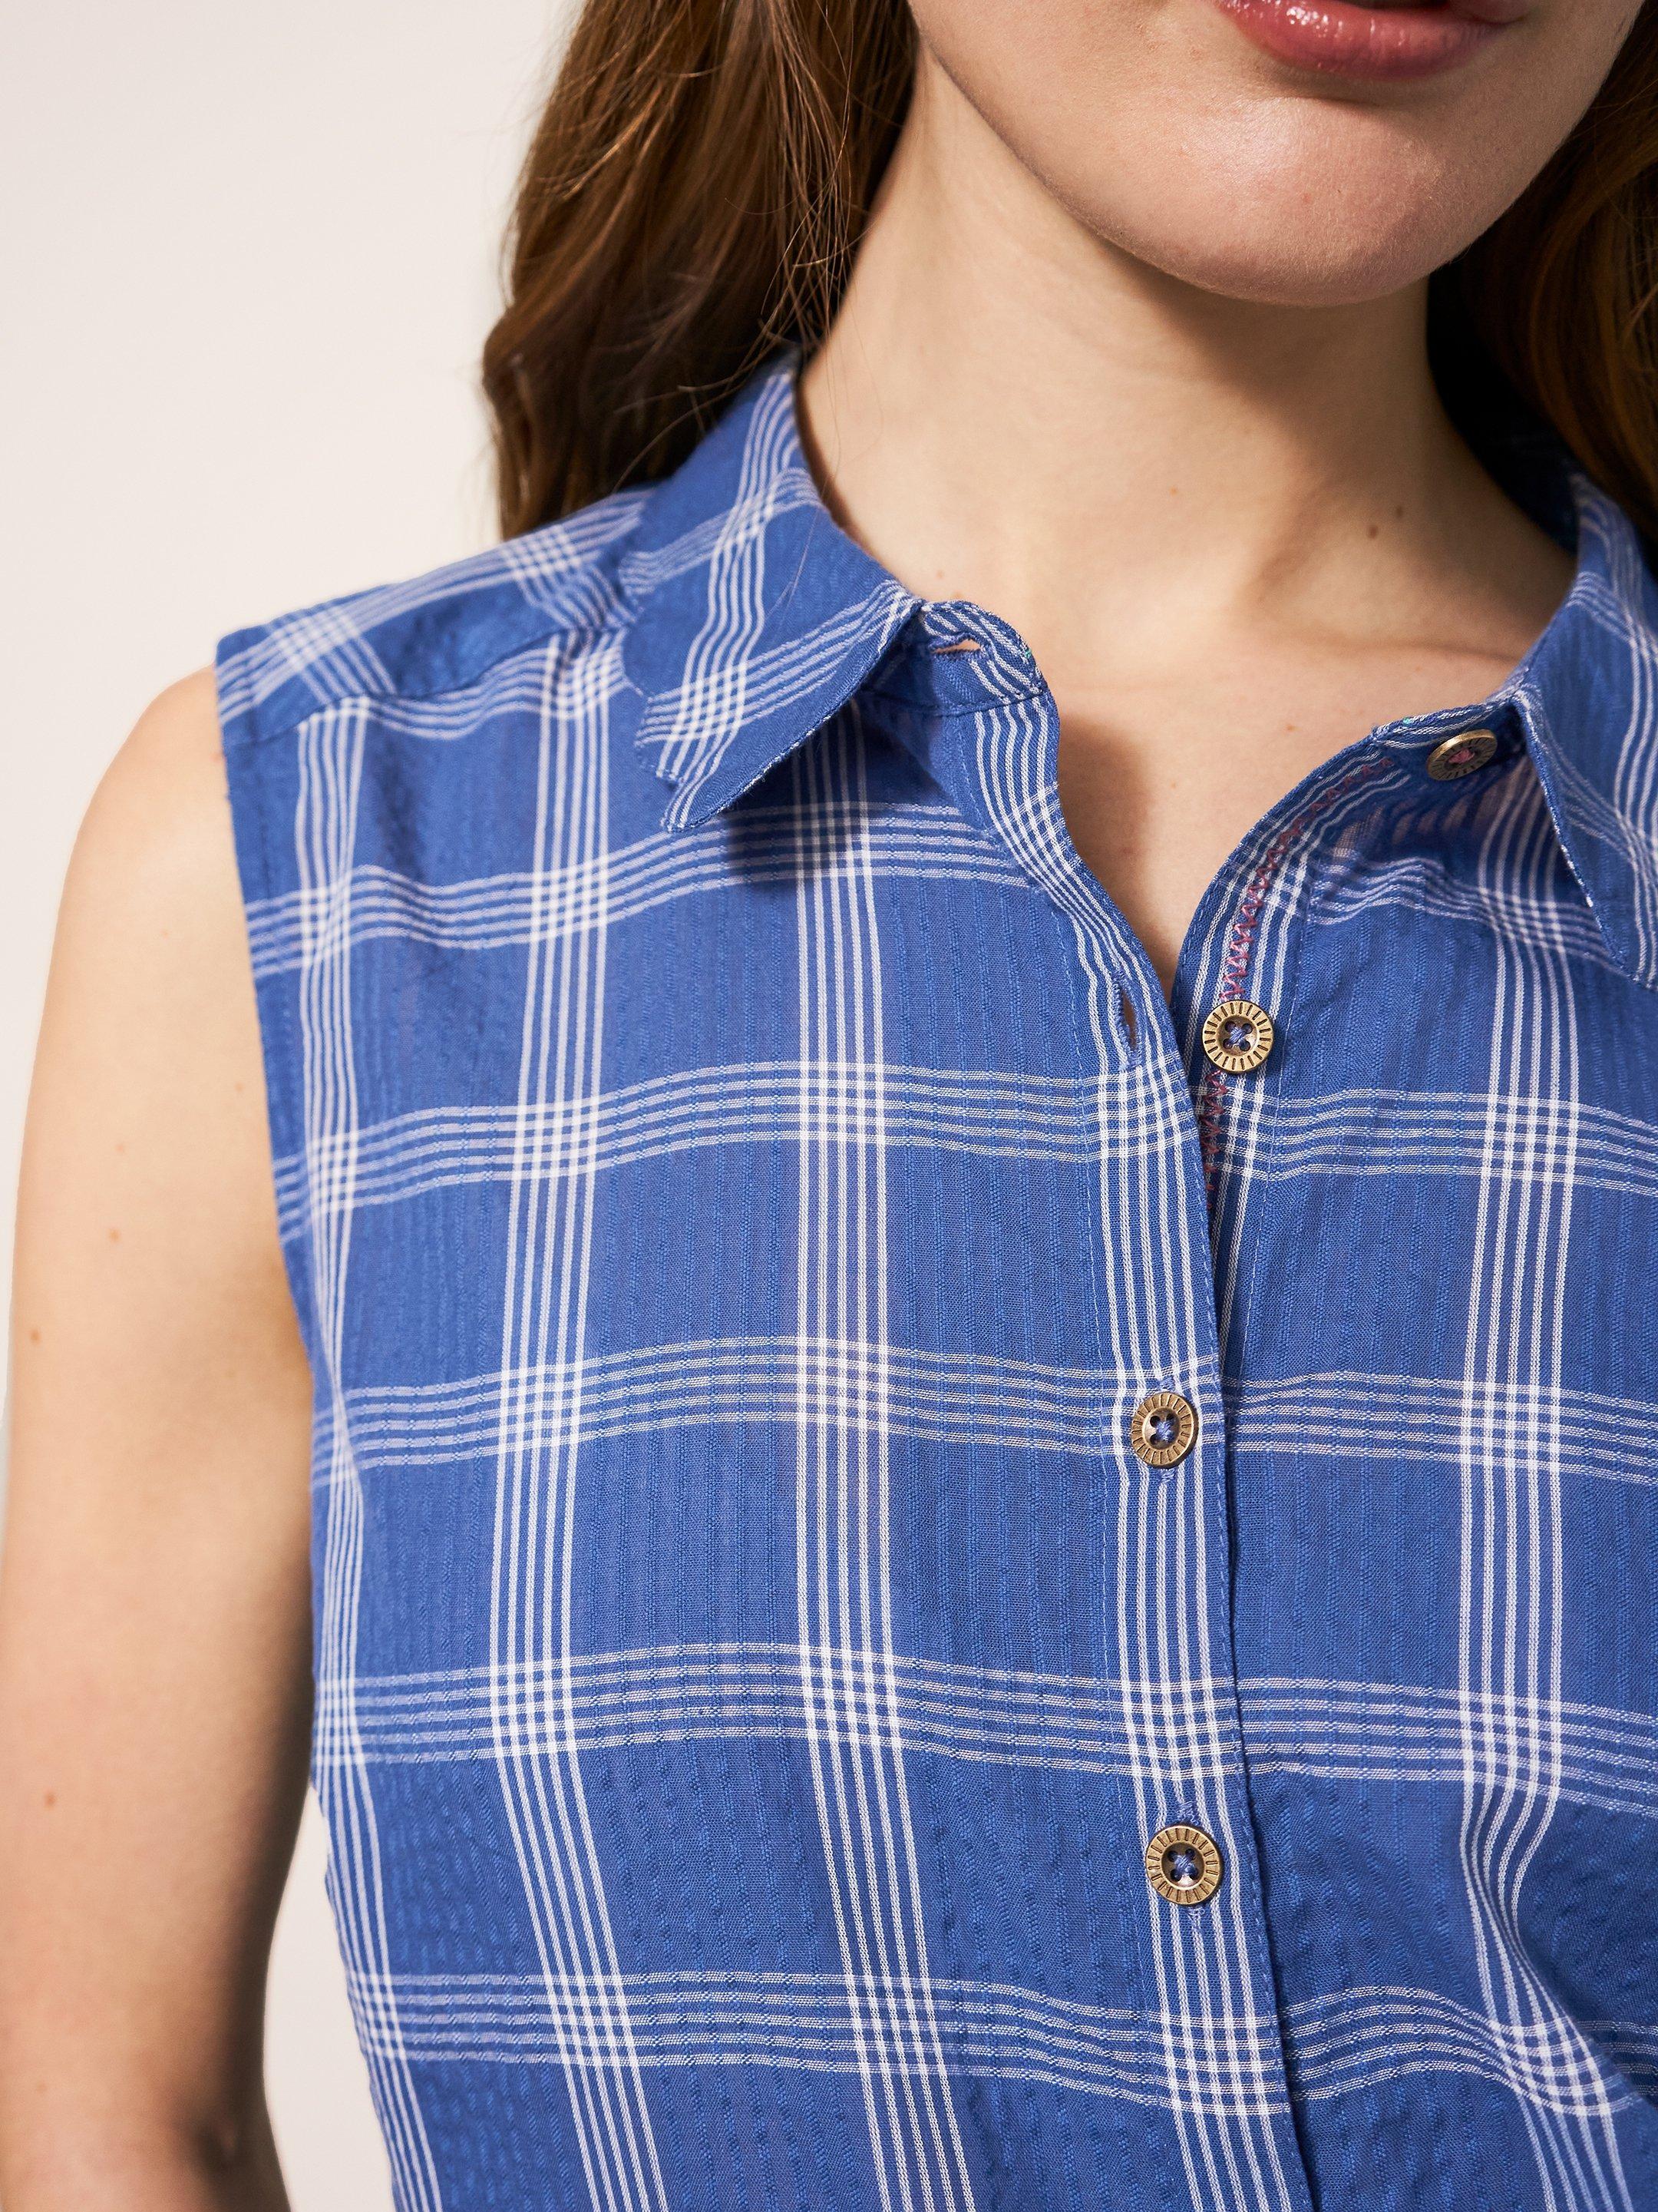 Lizzie Cotton Check Shirt in BLUE MLT - MODEL DETAIL